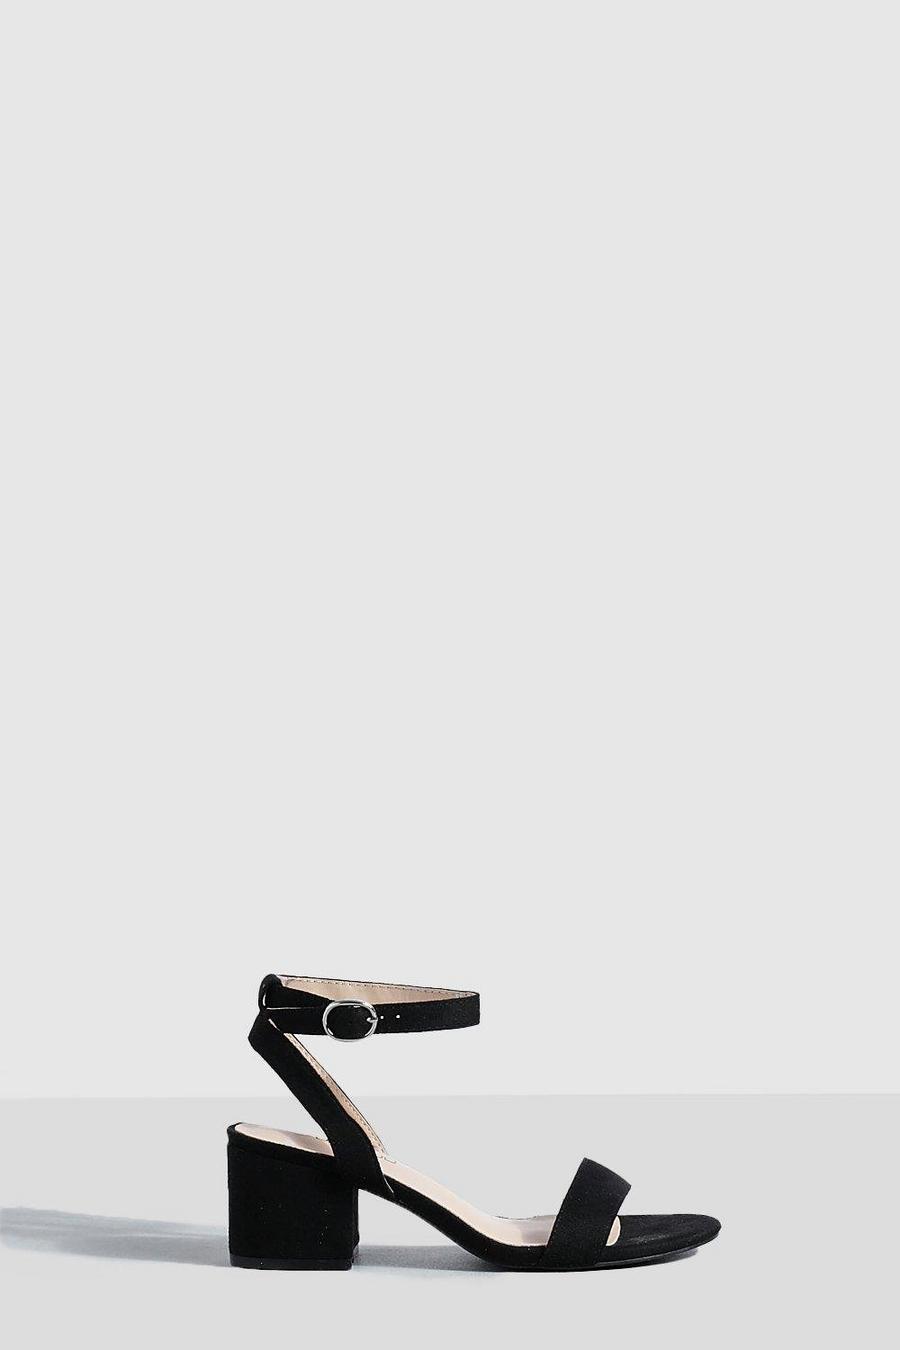 Black Low Block Barely There Heels   